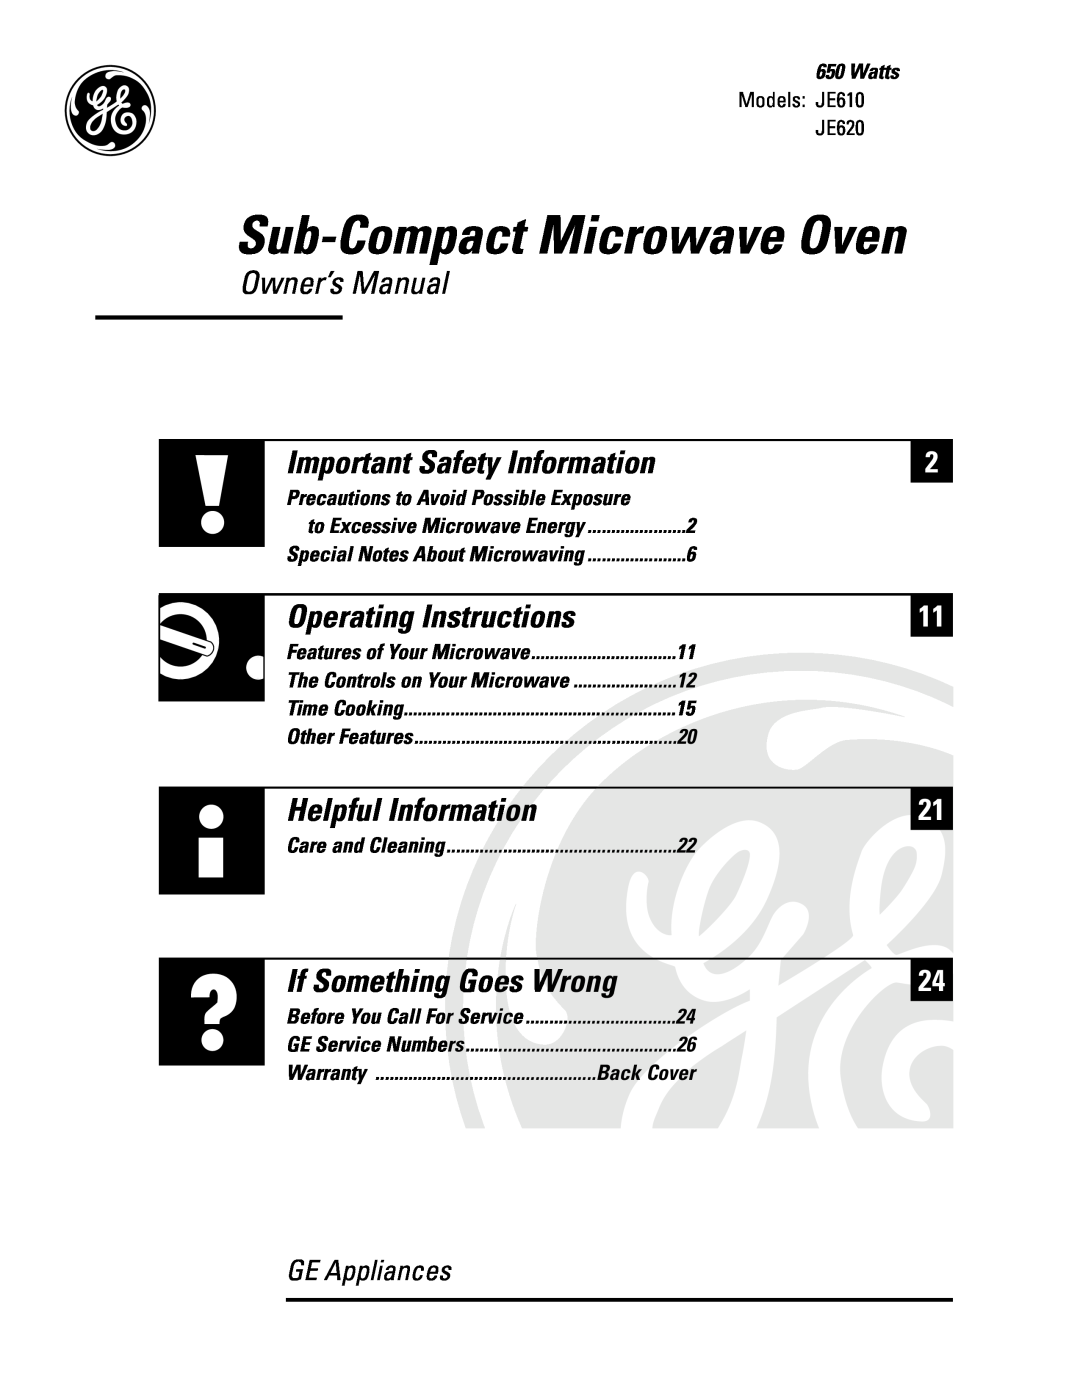 GE JE620 operating instructions Sub-CompactMicrowave Oven, Operating Instructions, Helpful Information, GE Appliances 